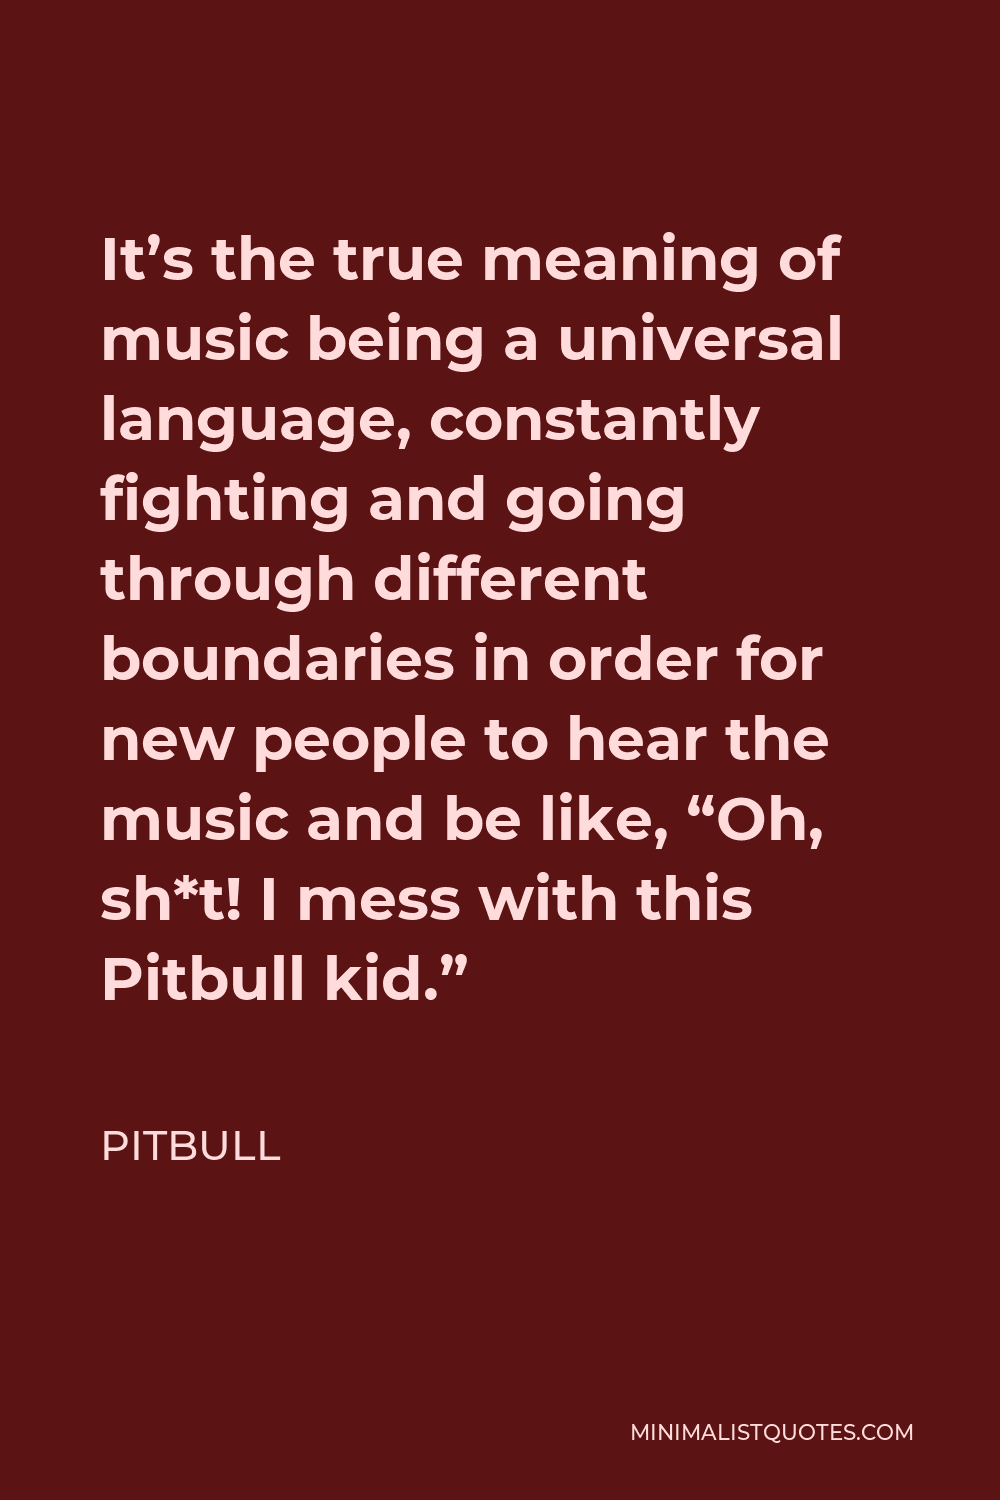 Pitbull Quote - It’s the true meaning of music being a universal language, constantly fighting and going through different boundaries in order for new people to hear the music and be like, “Oh, sh*t! I mess with this Pitbull kid.”